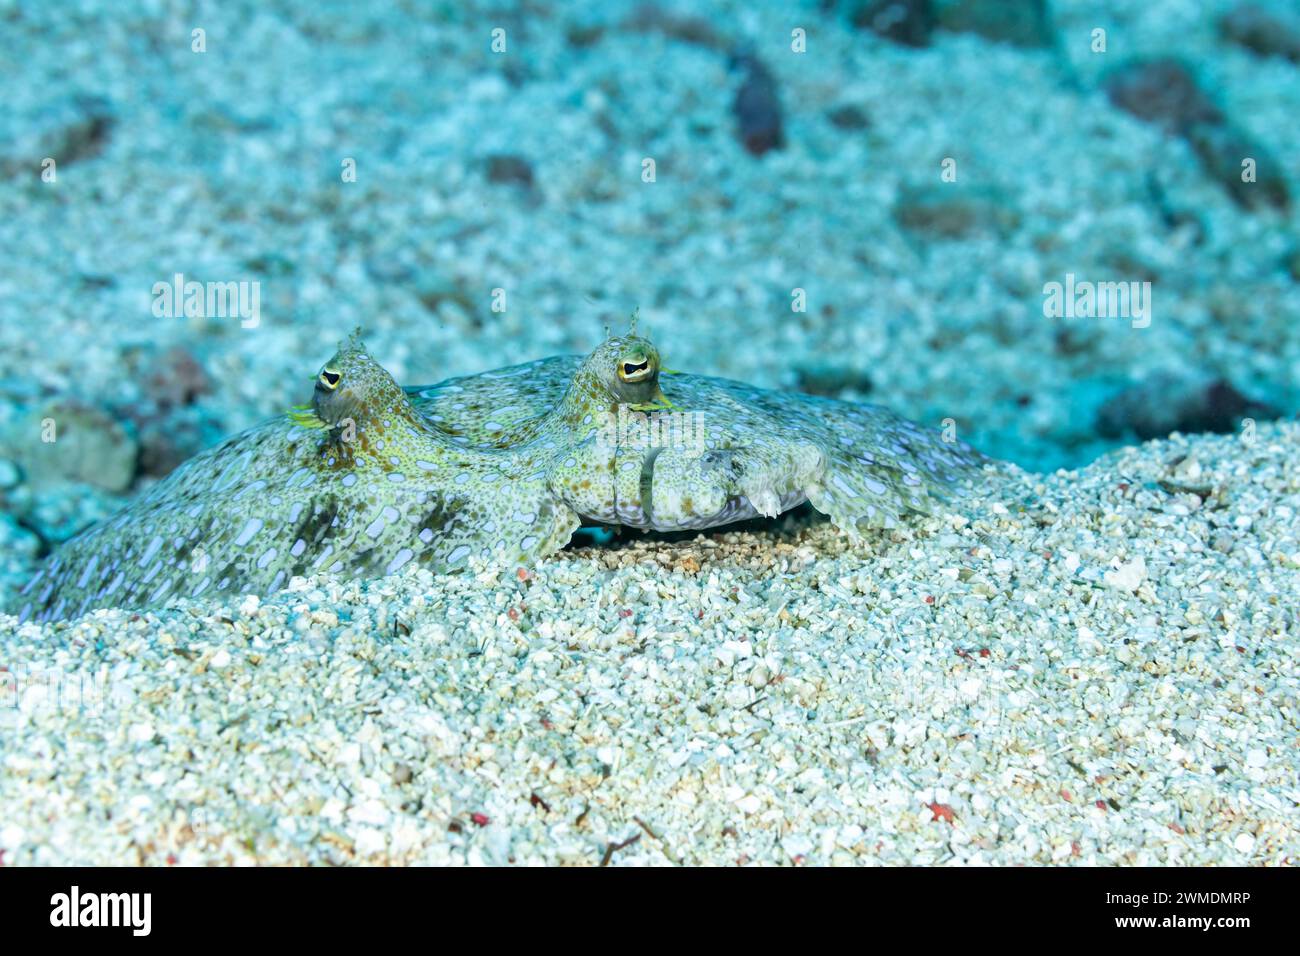 Close up view of Halibut, Hippoglossus stenolepis, fish’s eyes and mouth camouflaged on white sand Stock Photo